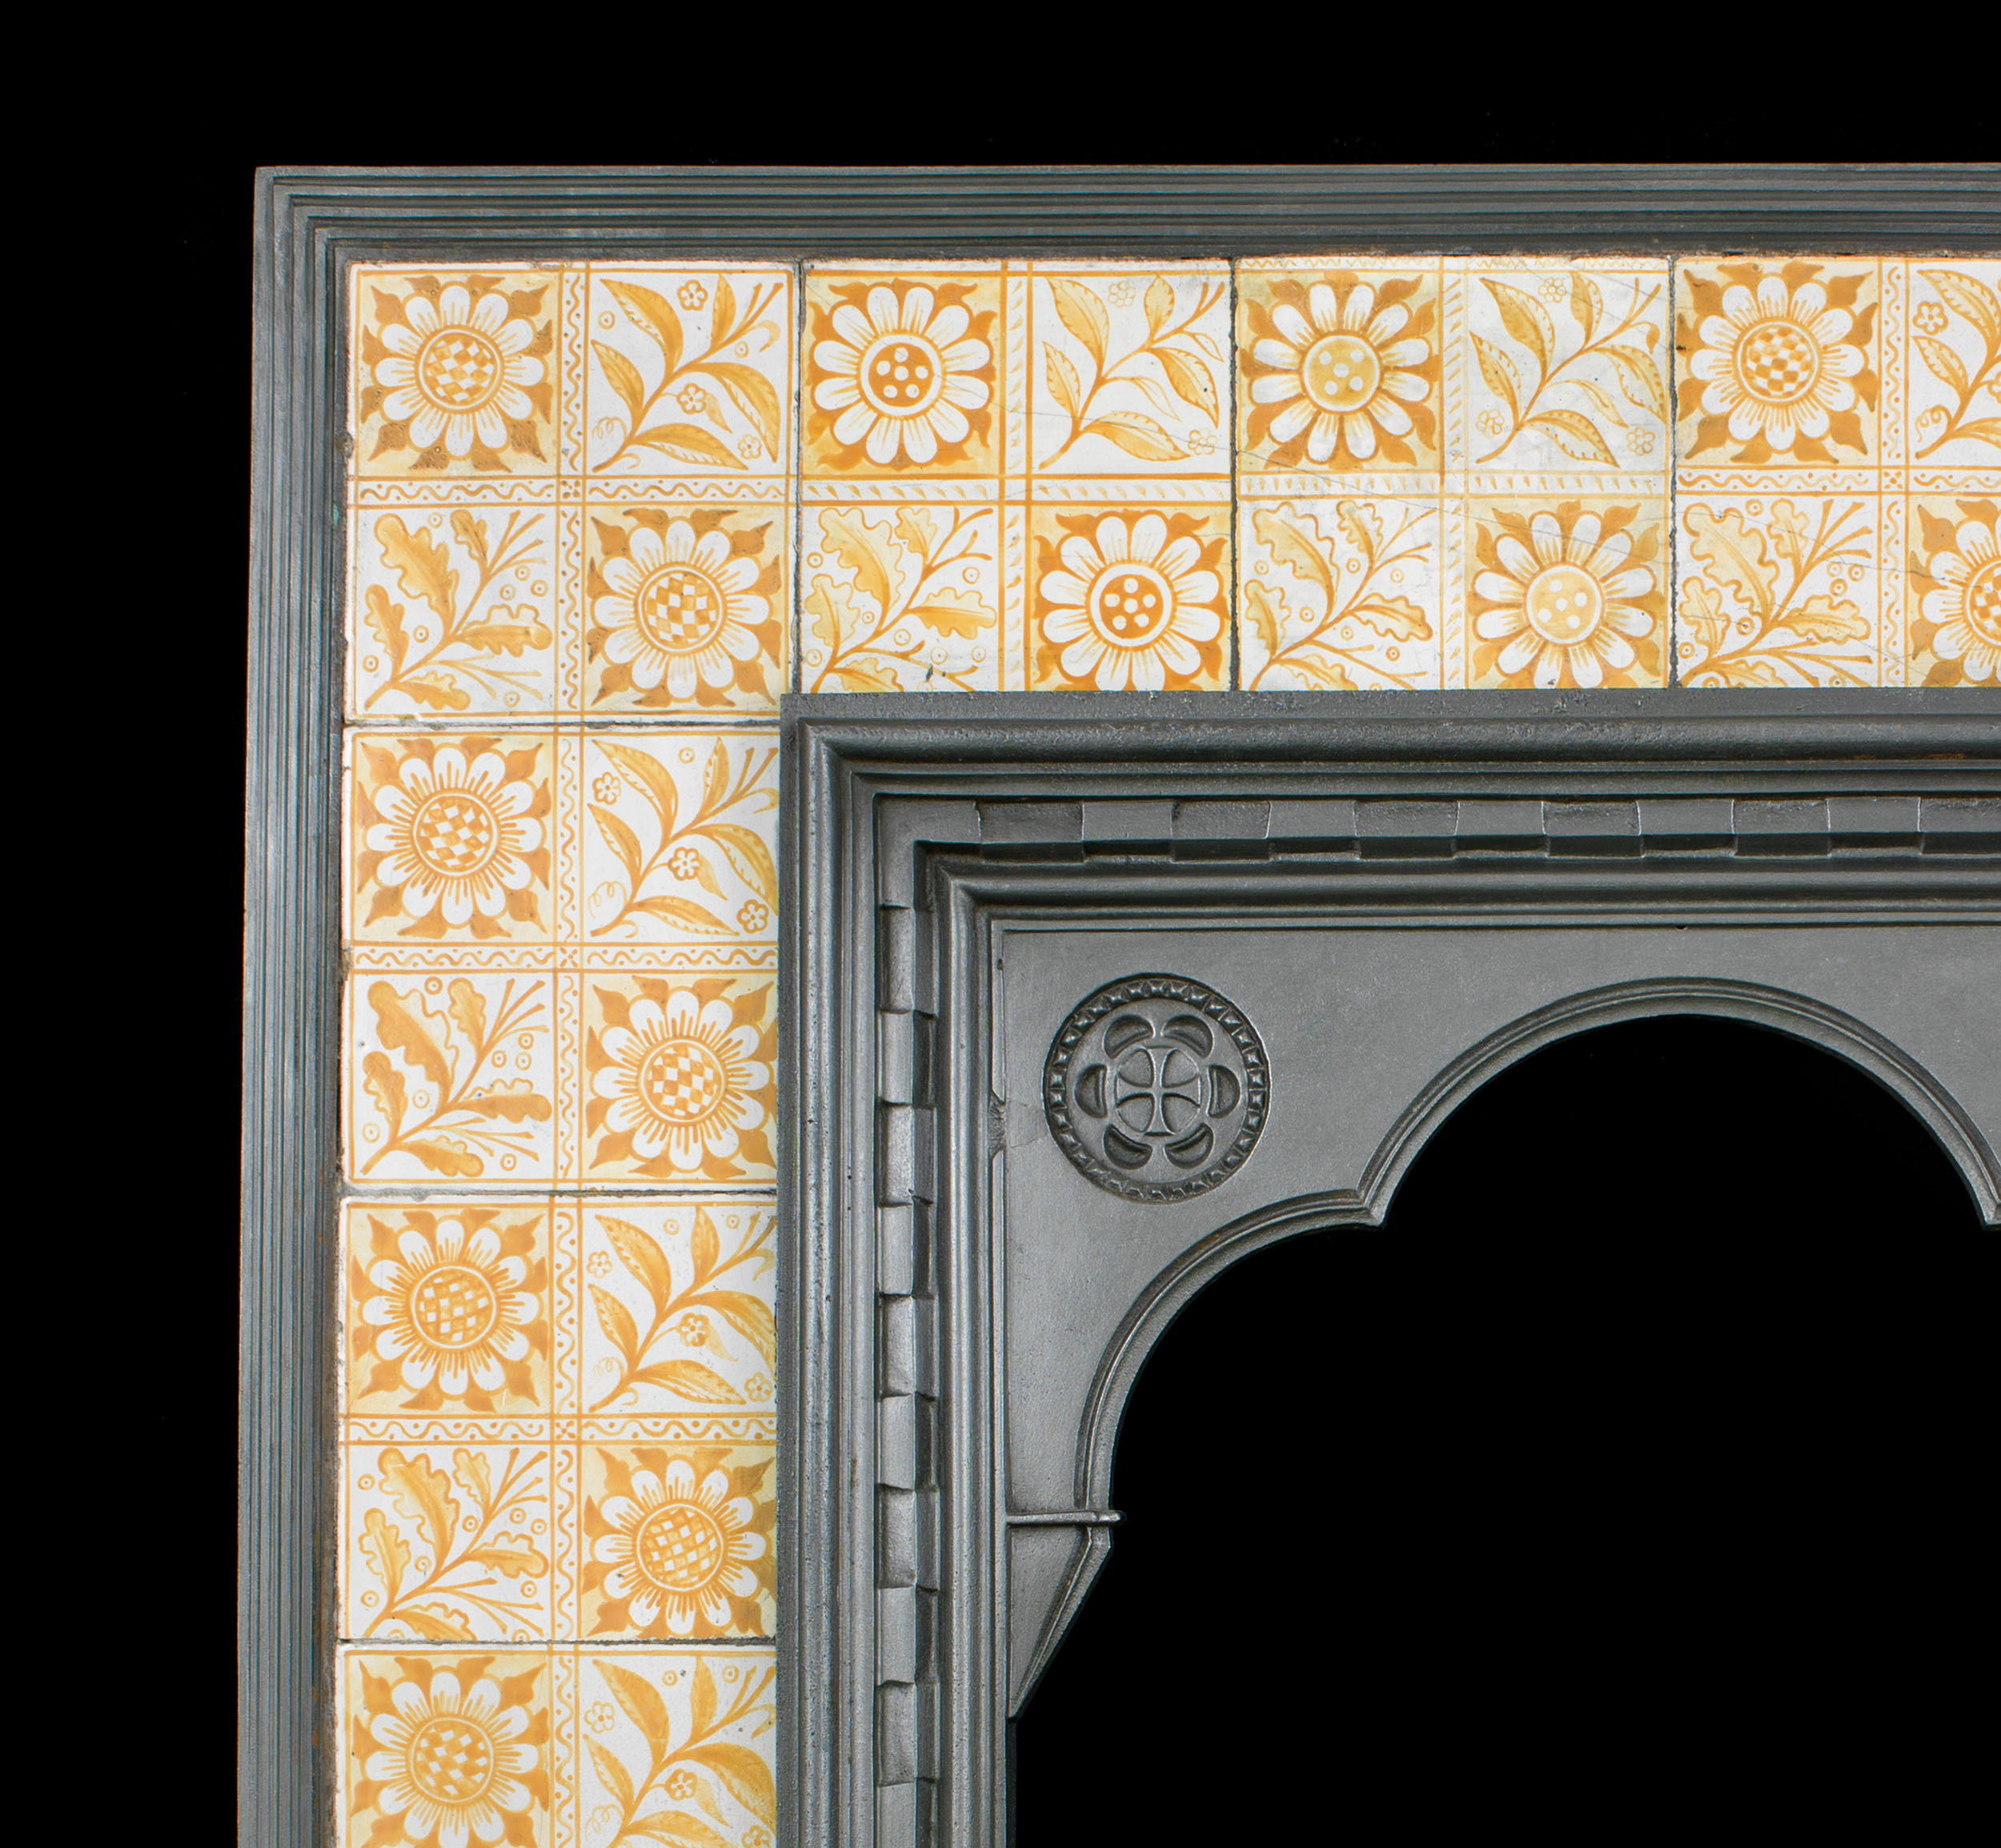  A William Morris Tiled Fireplace Insert 